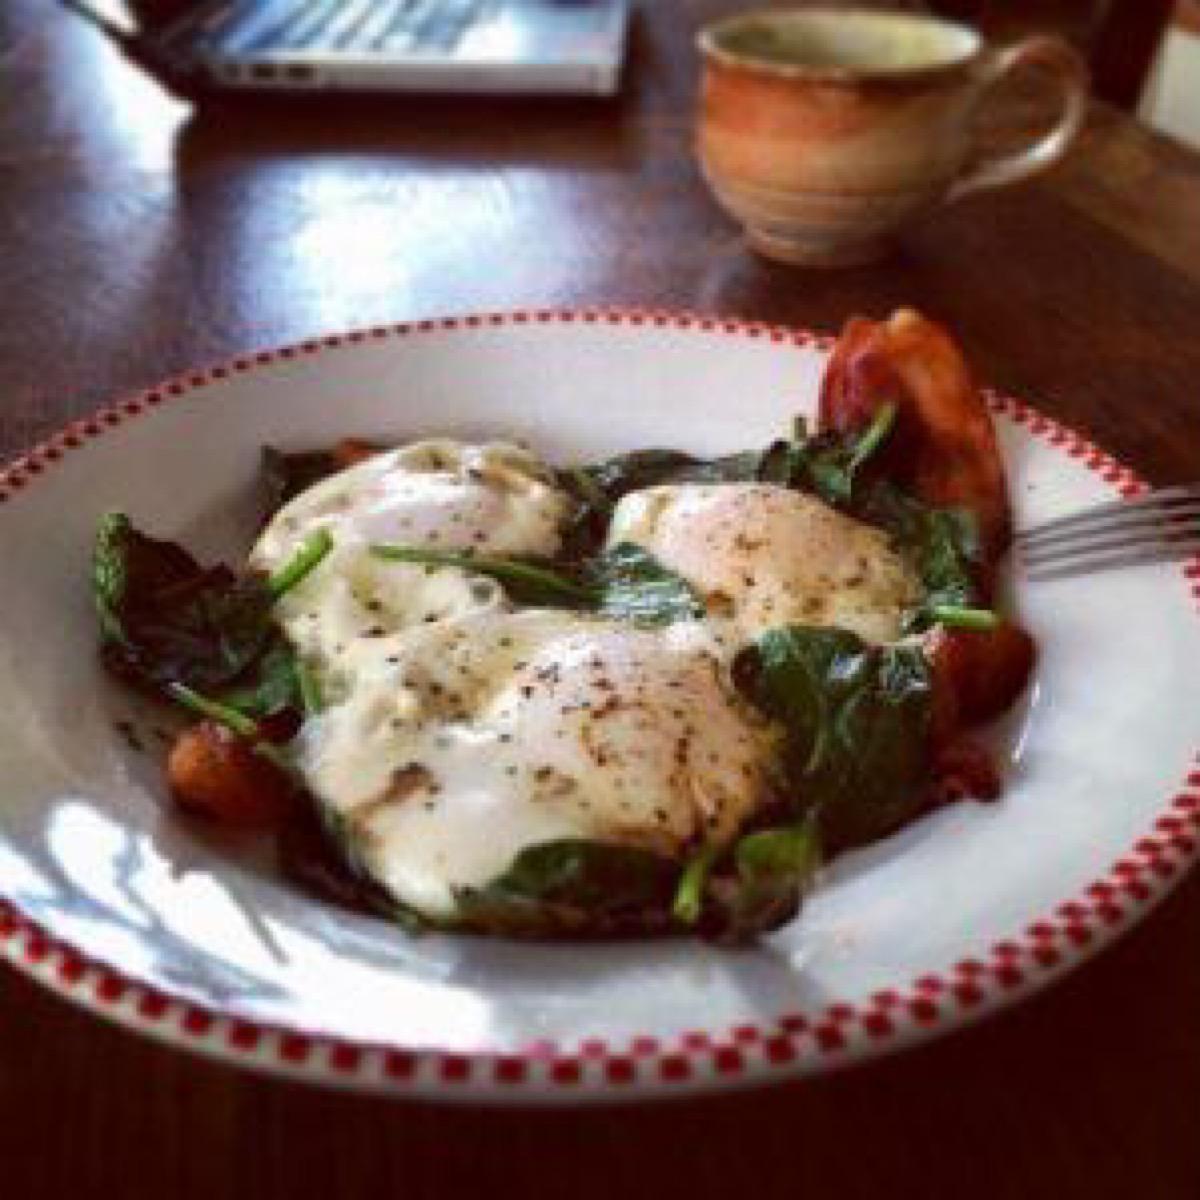 Slow carb breakfast of bacon, eggs, and spinach